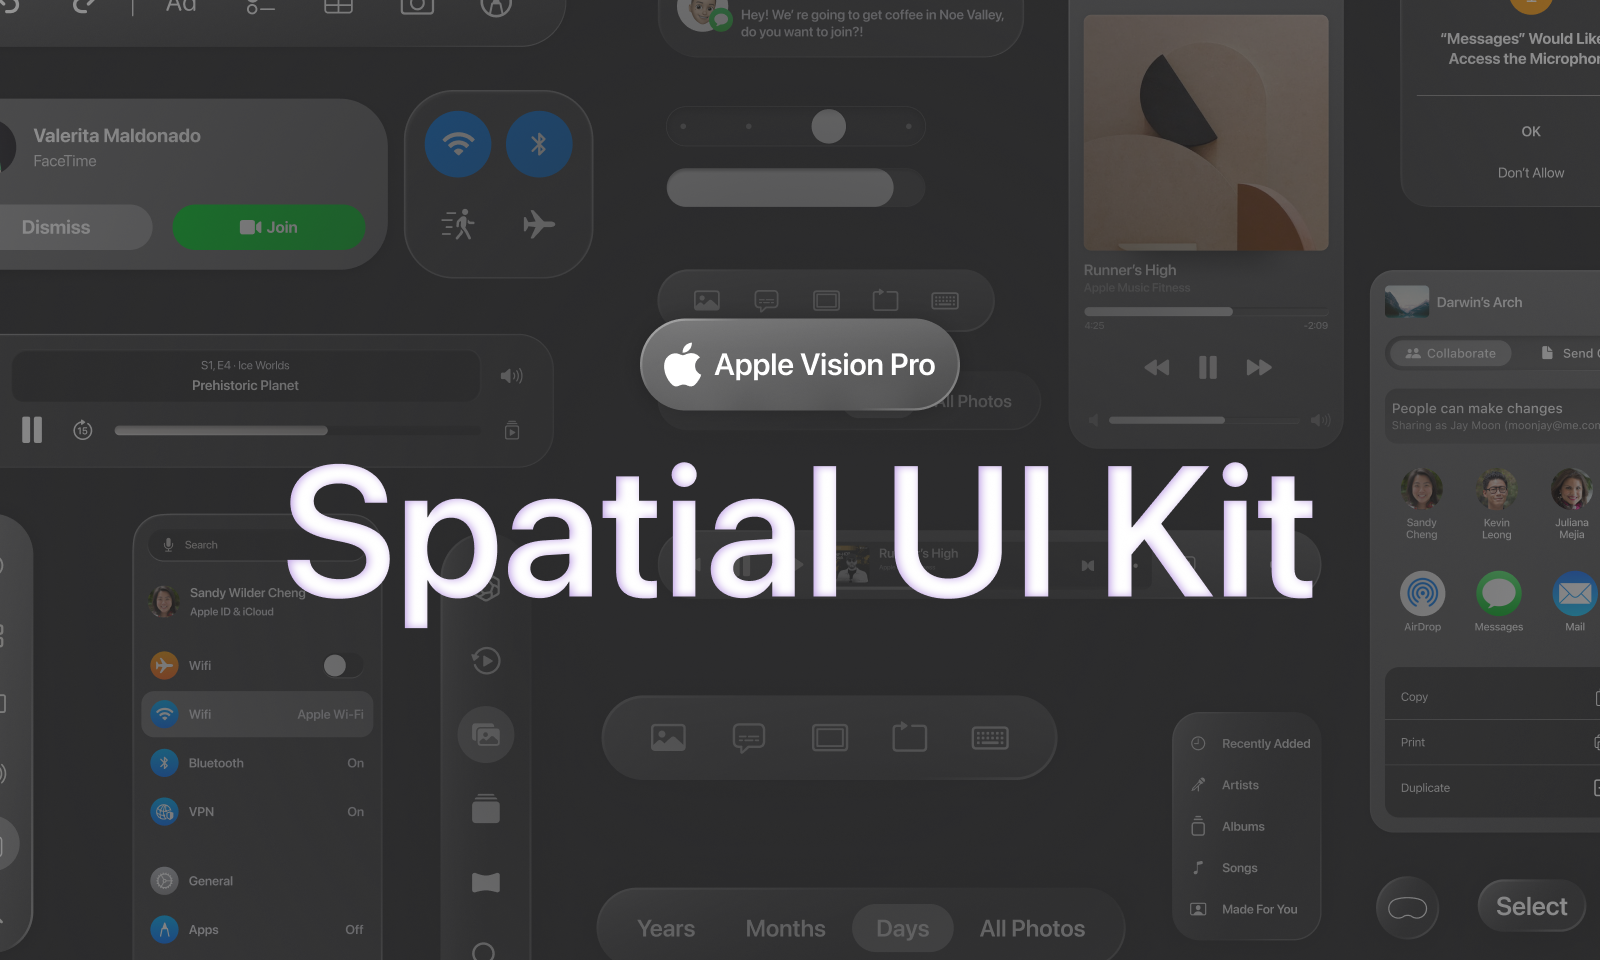 Thumbnail for an Apple Vision Pro Figma UI kit called “Spatial UI Kit”